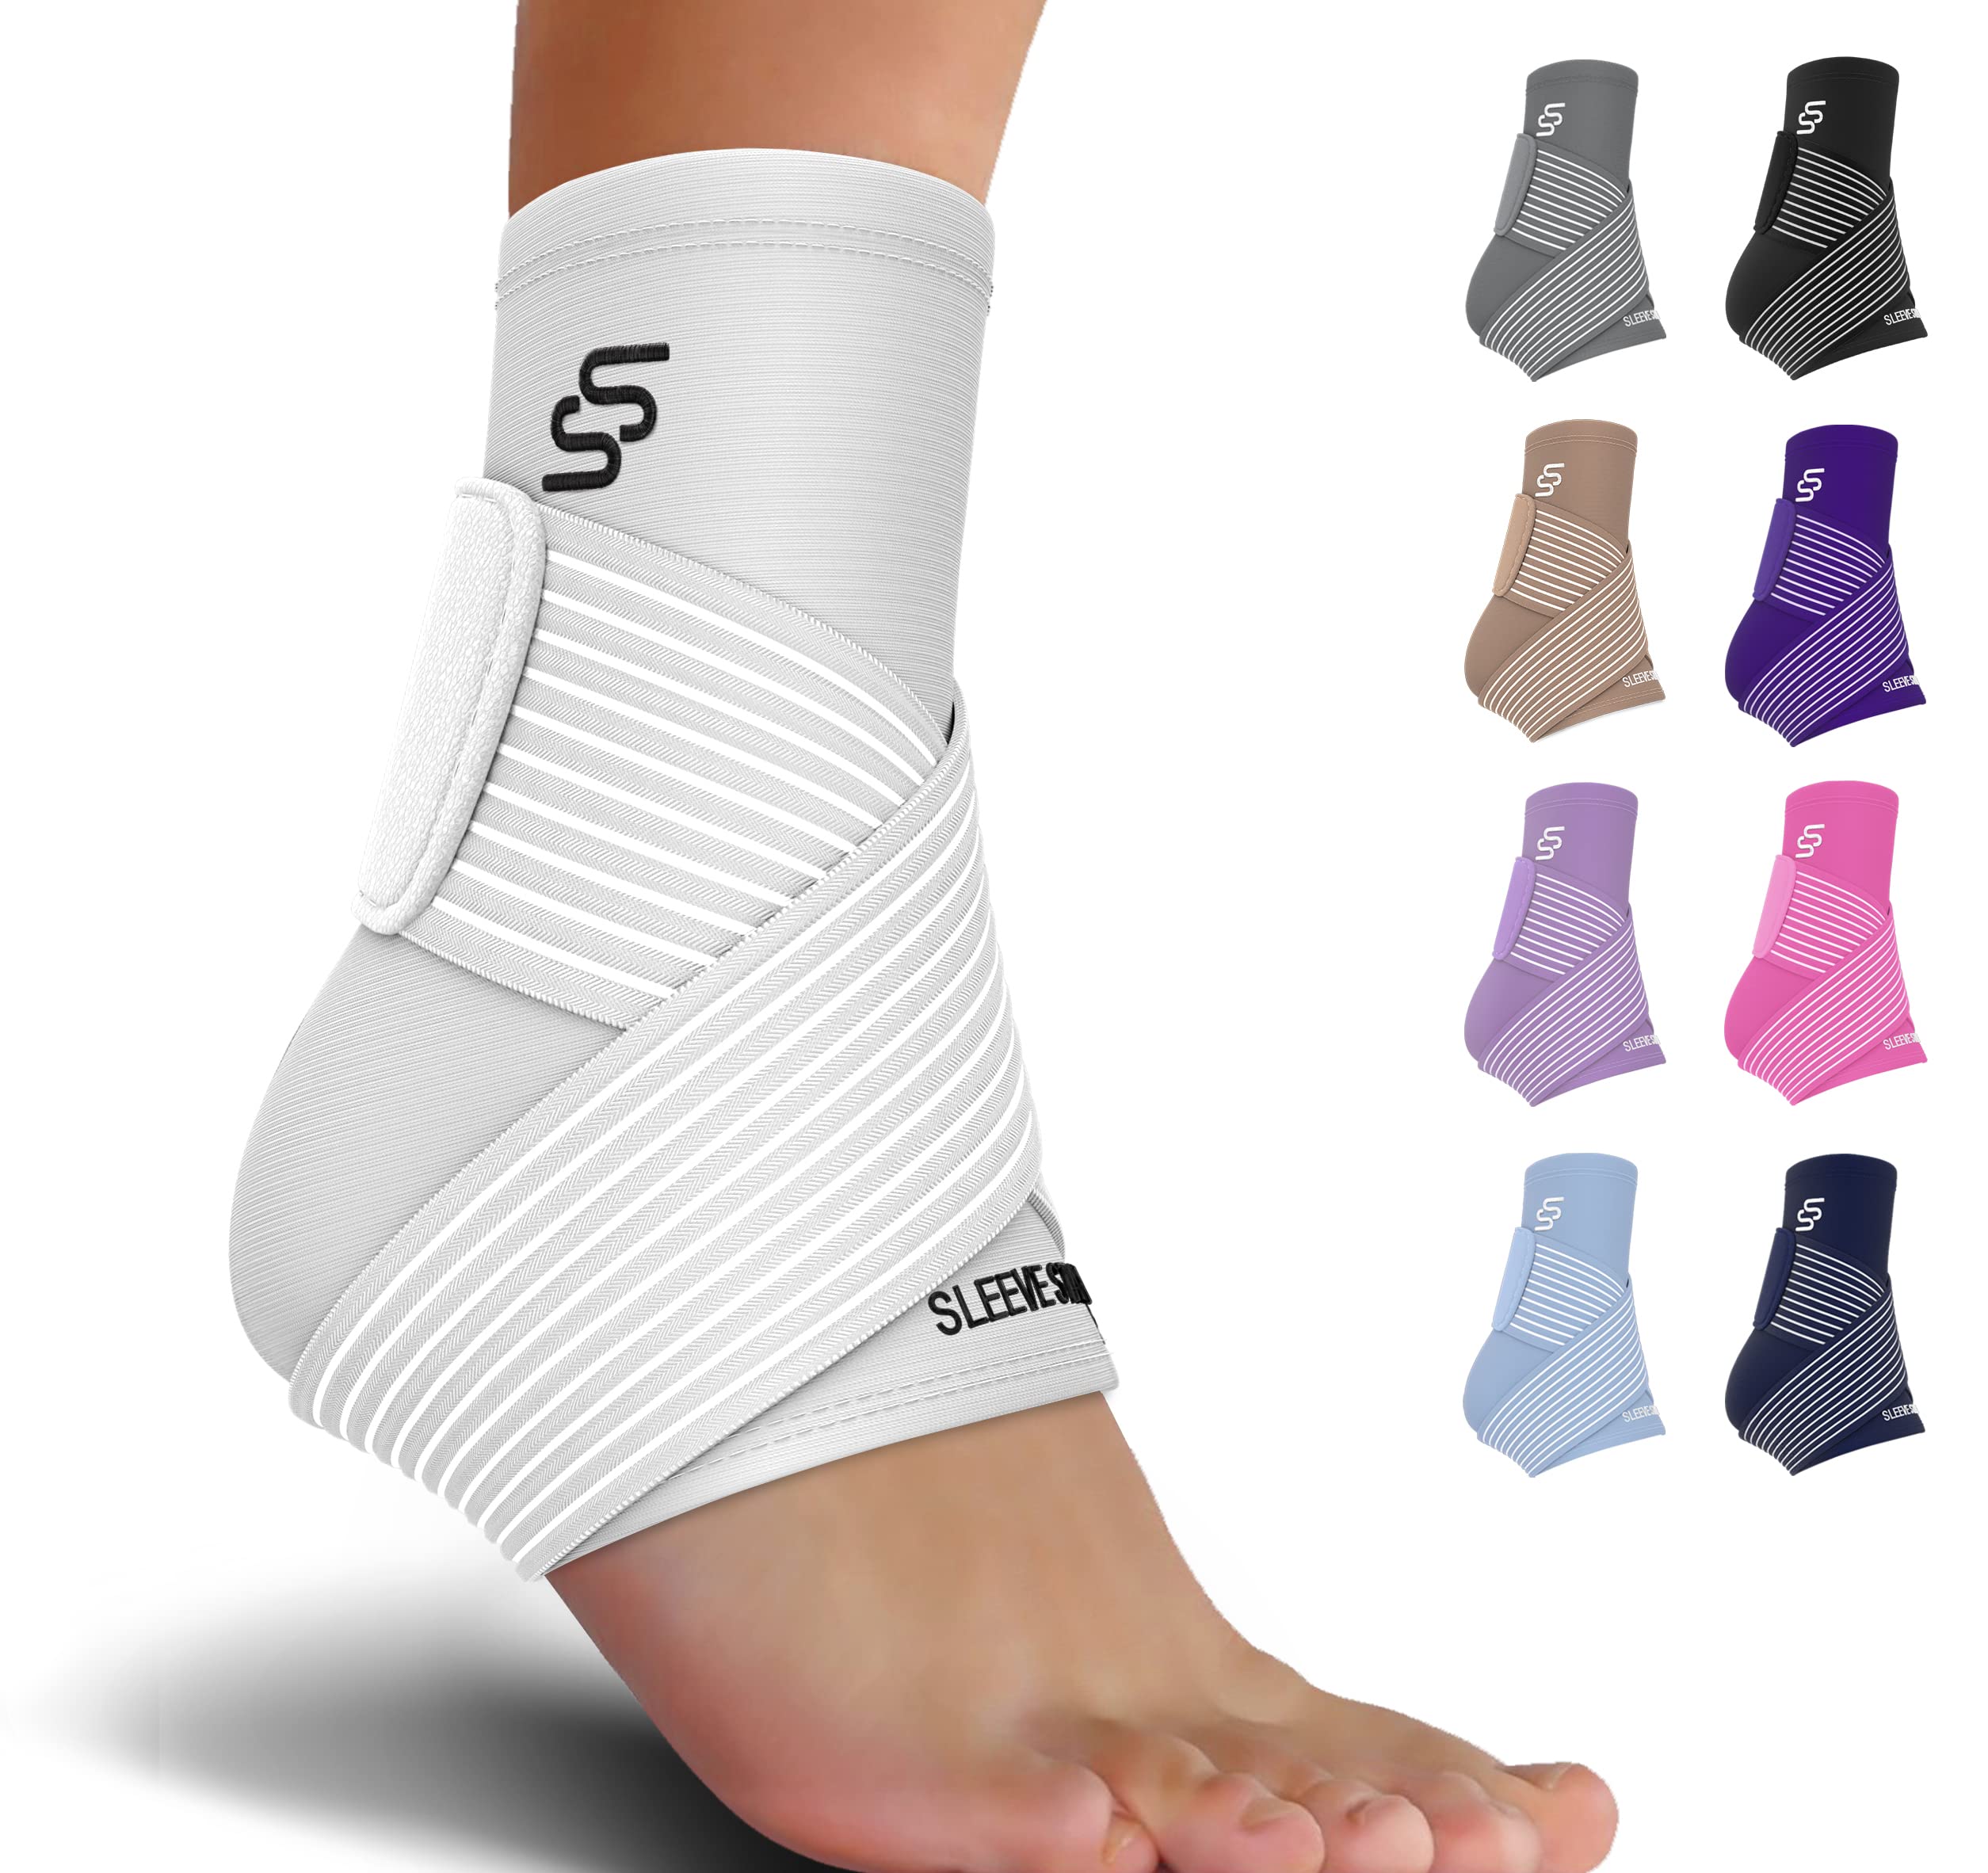 Buy Wonder Care- Ankle Brace Adjustable Breathable Ankle Support with  Elastic Fabric, Compression Ankle Wrap for Sports Protect, Ankle Sprain,  Plantar Fasciitis -XXL Online at Low Prices in India - Amazon.in